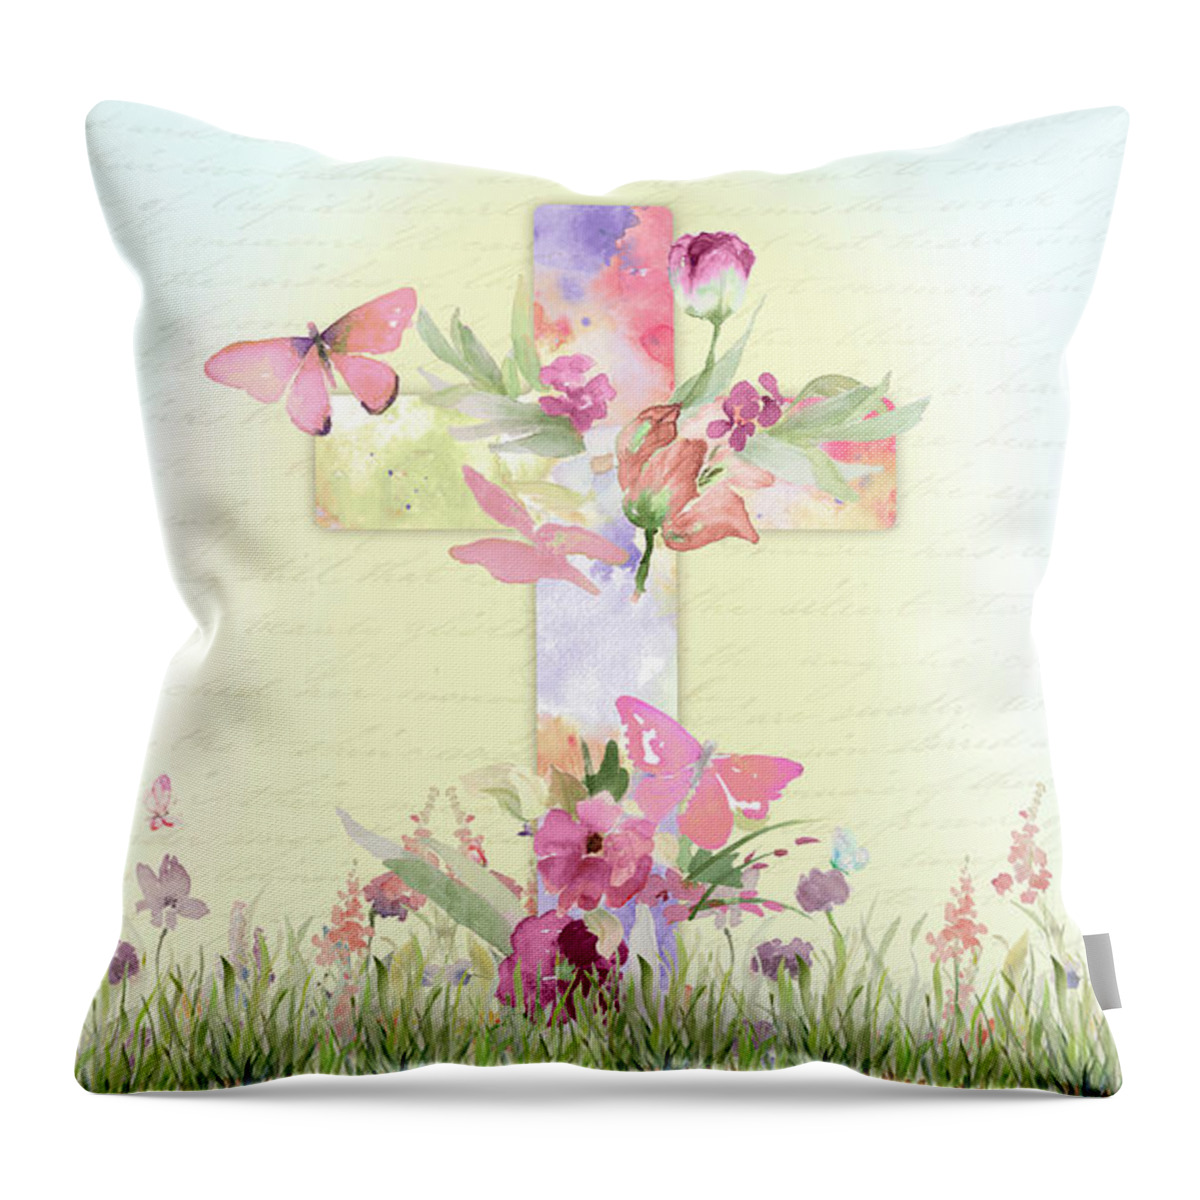 Blessed Throw Pillow featuring the mixed media Blessed Easter by Lanie Loreth